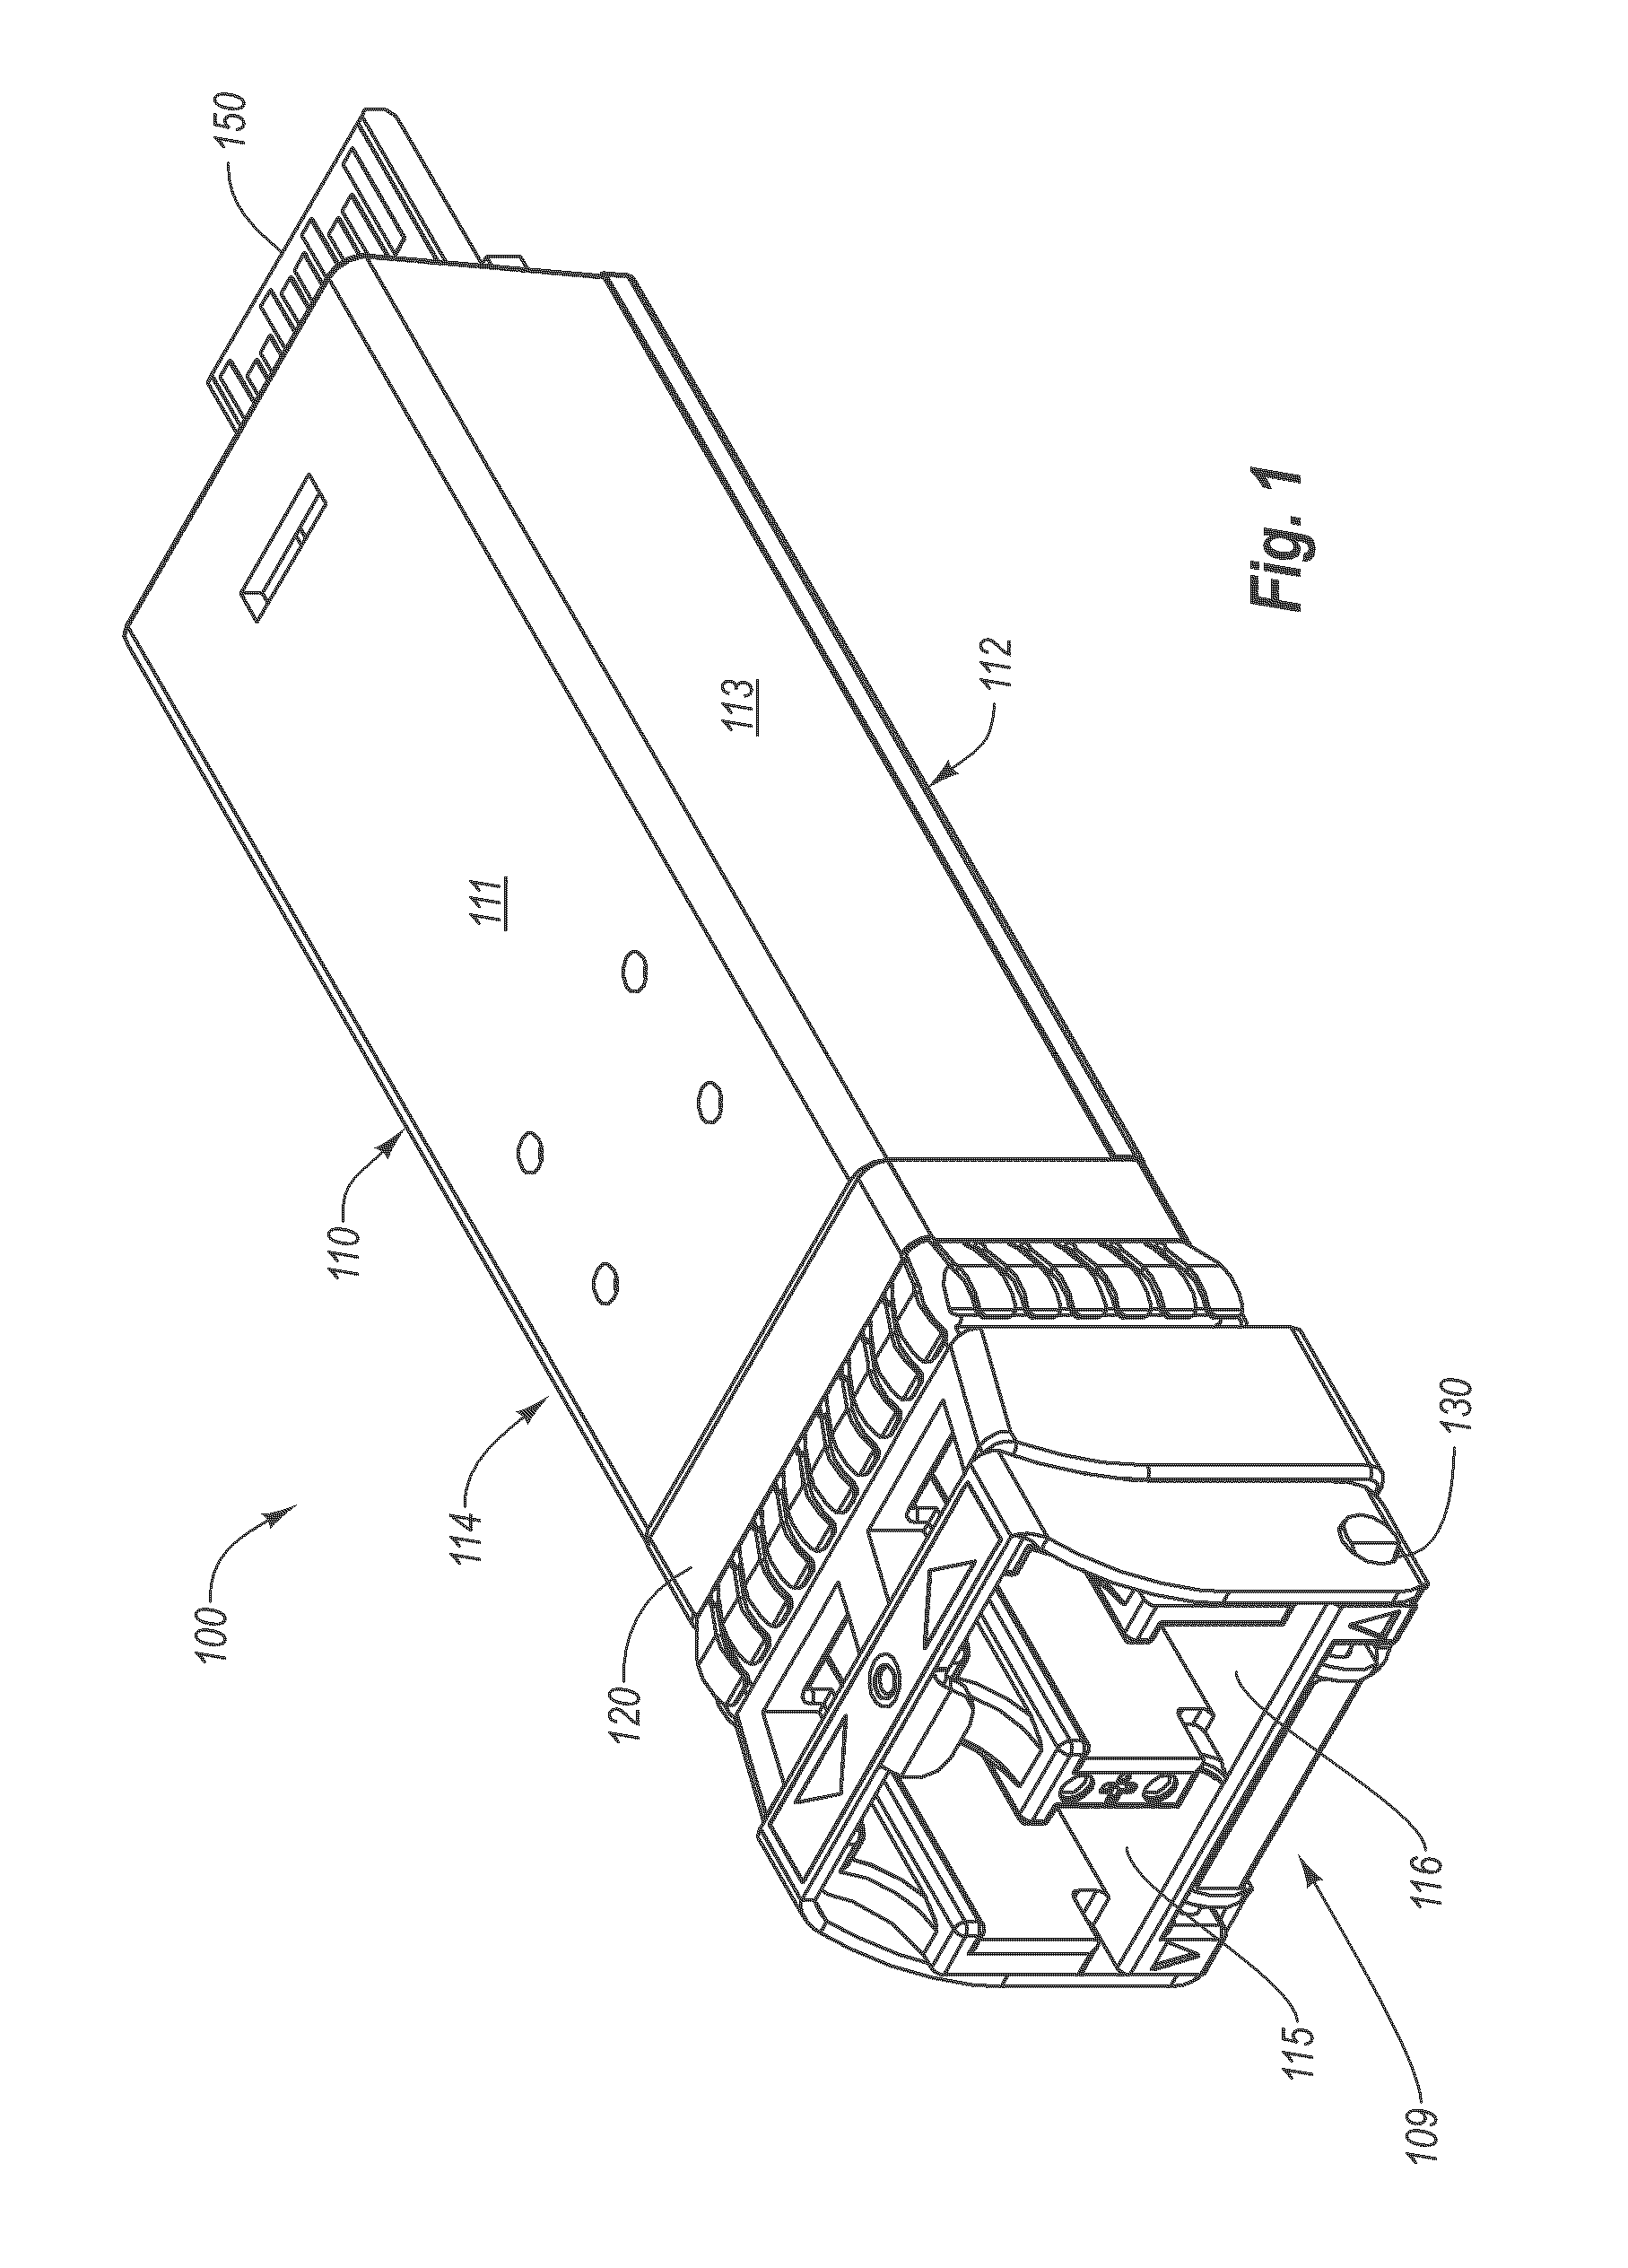 Monolithic shell for an optical electrical device